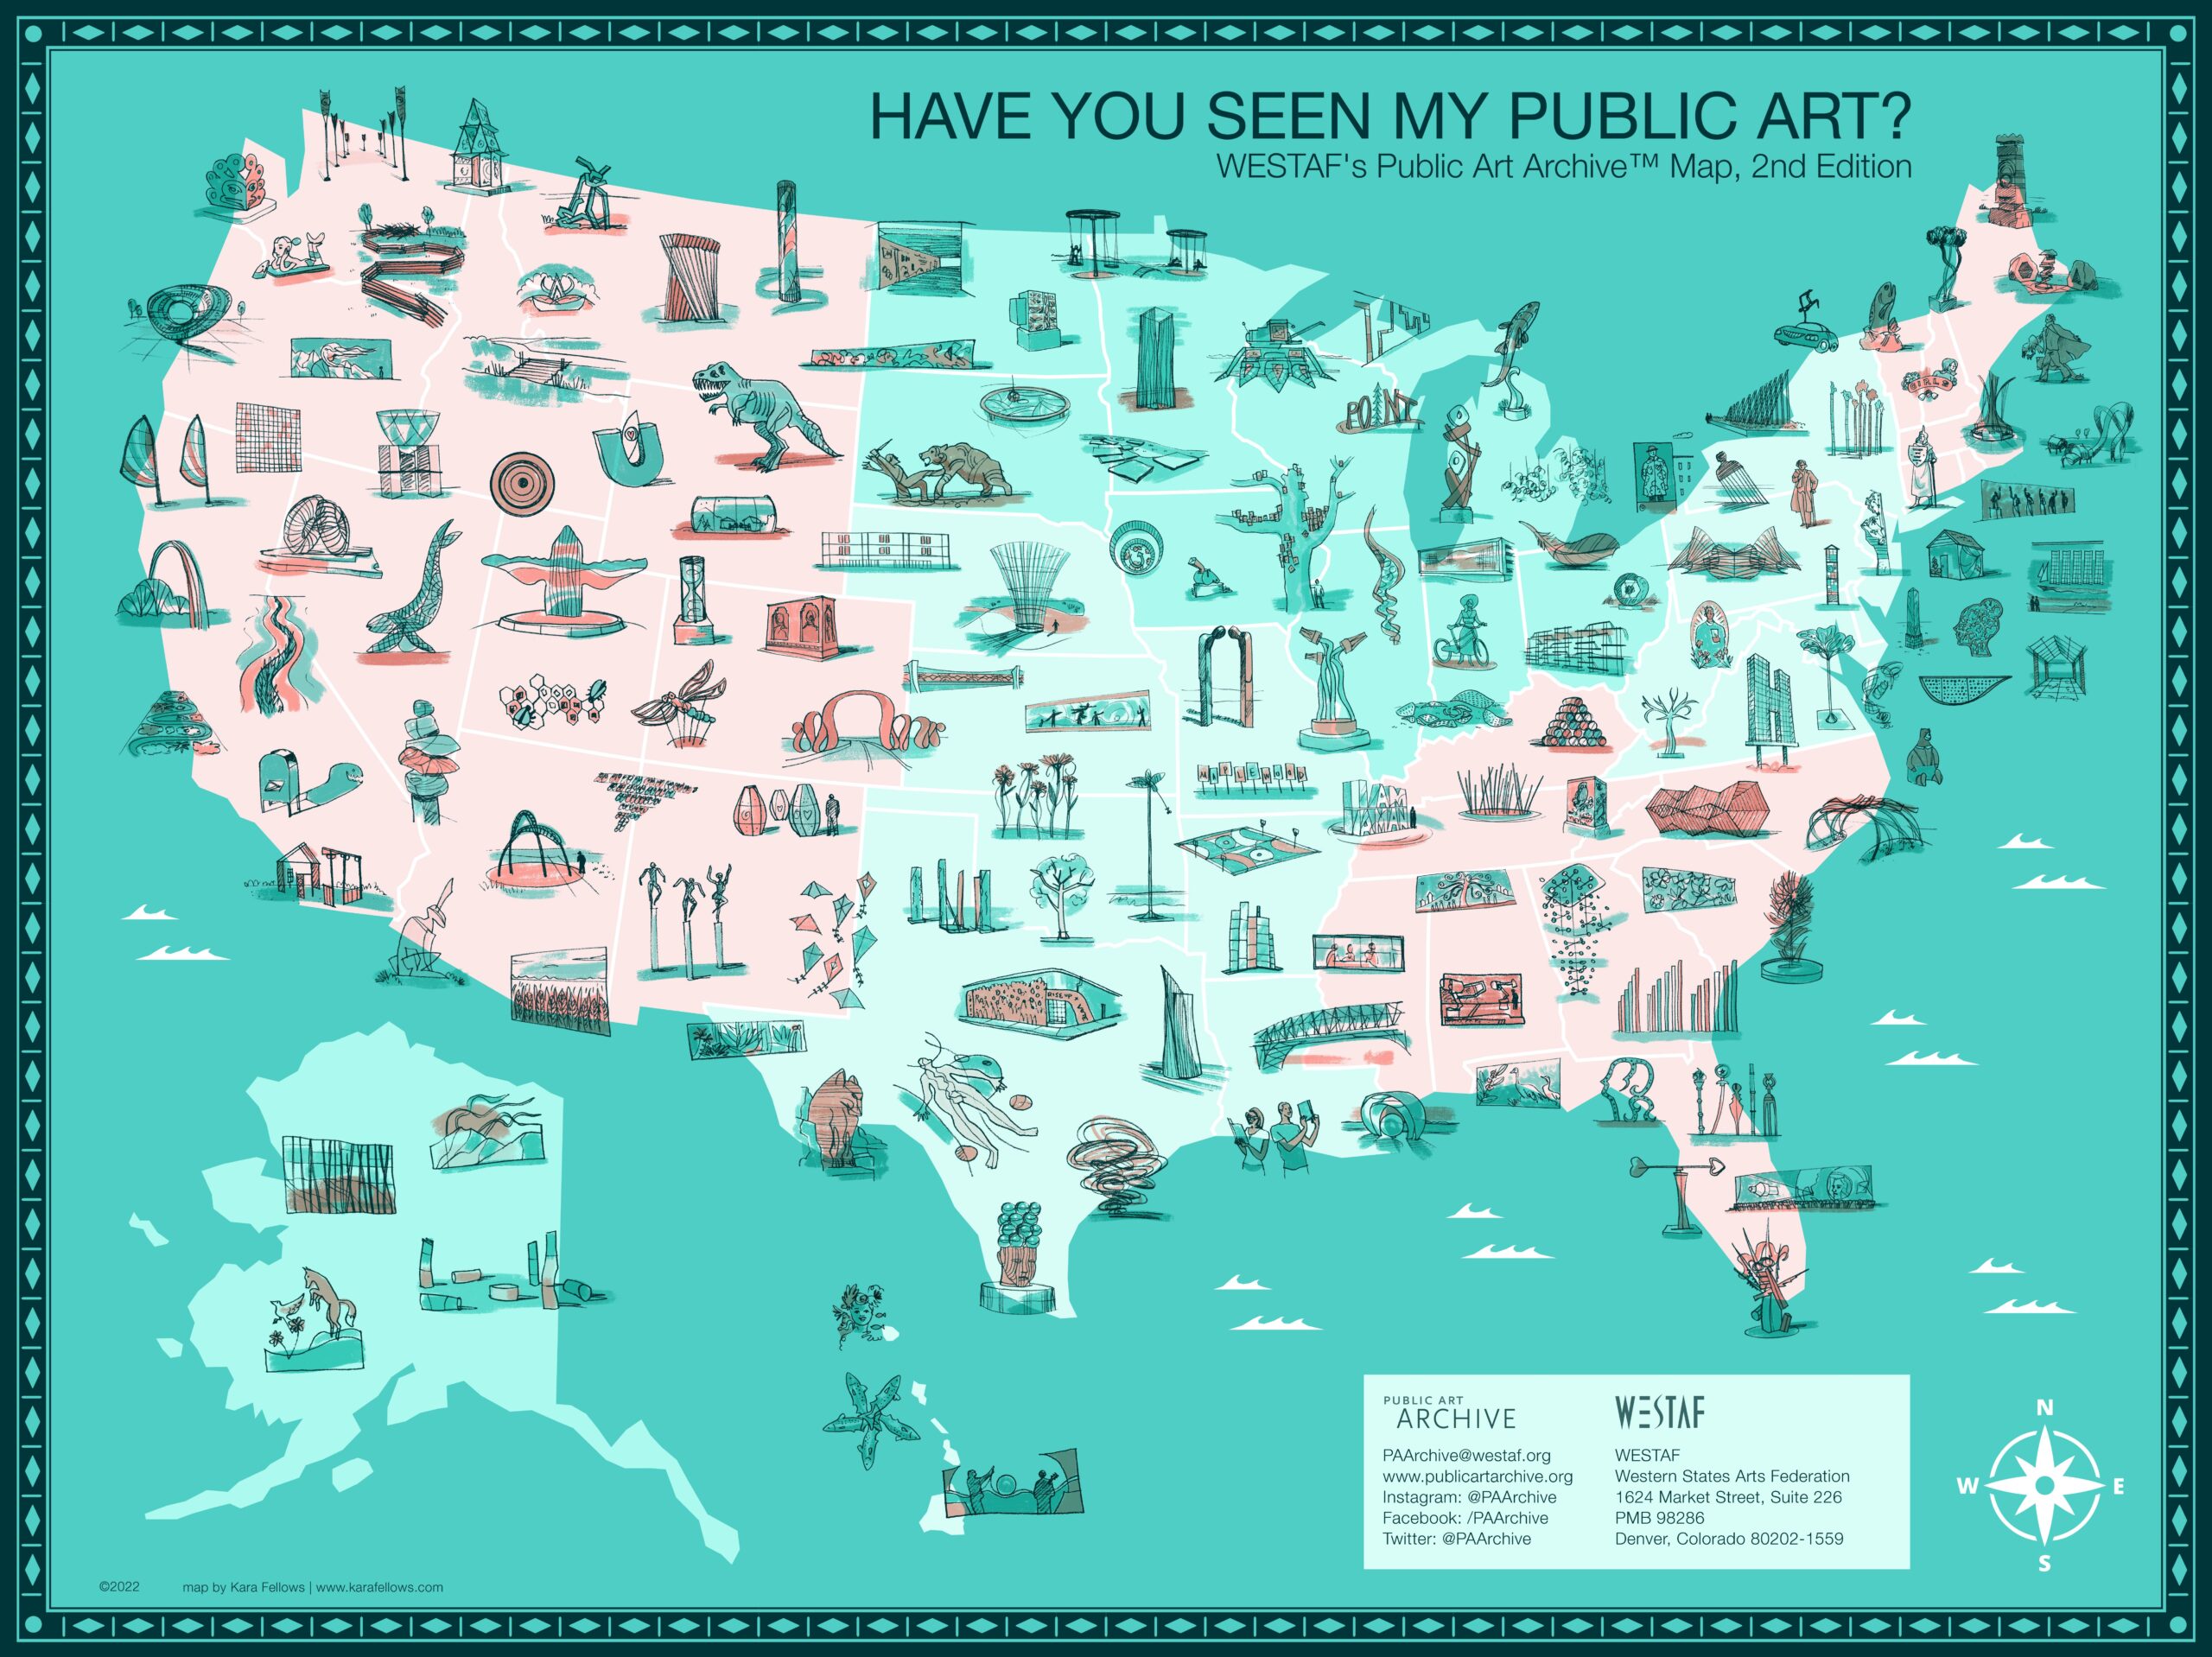 Celebrating the Public Art Archive’s Second Edition of Have You Seen My Public Art? Map!